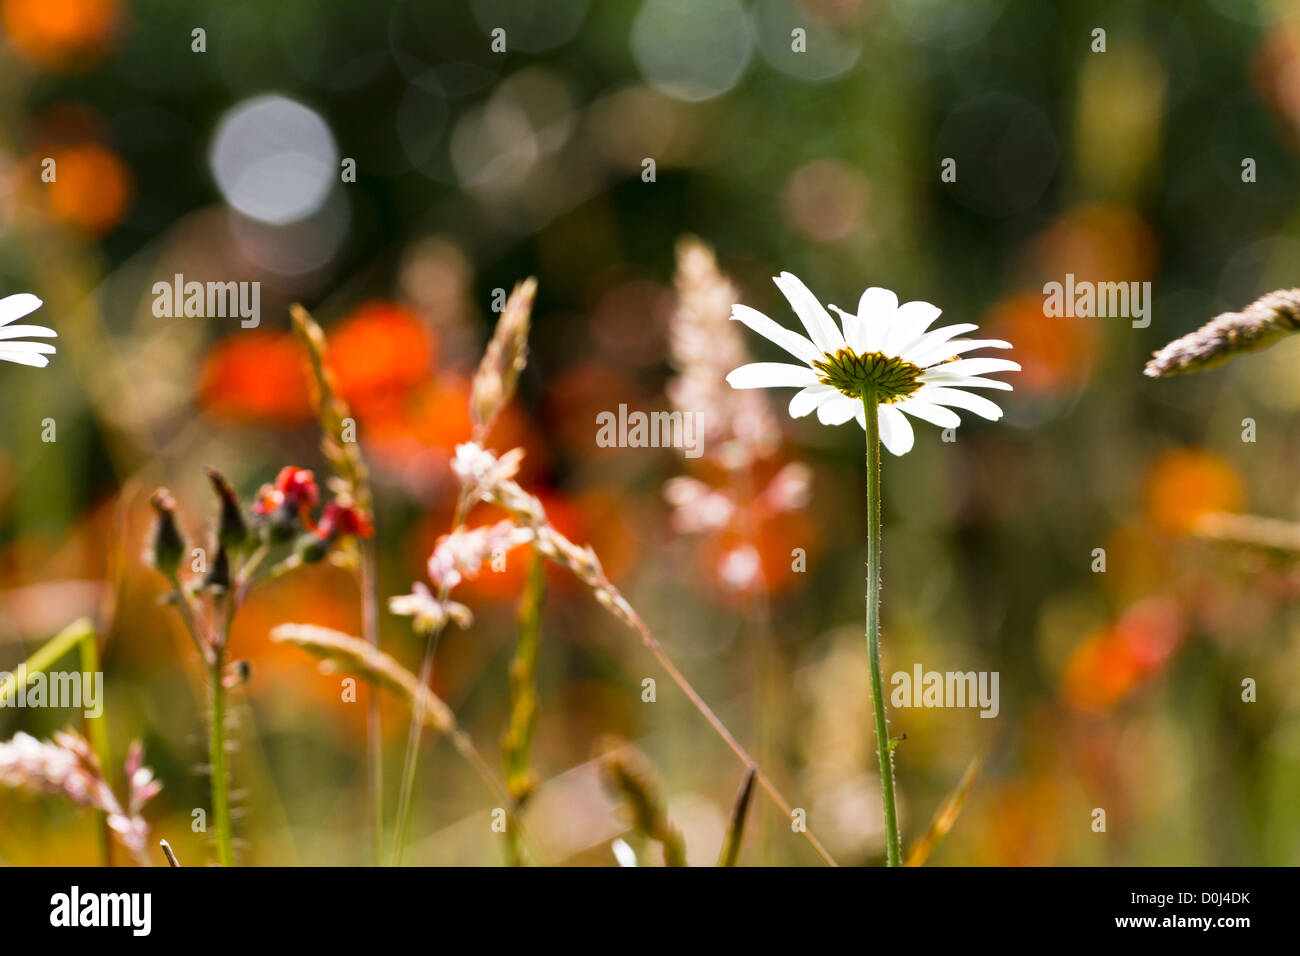 A Daisy beside a pine forest in a hedgerow of summer flowers. Stock Photo